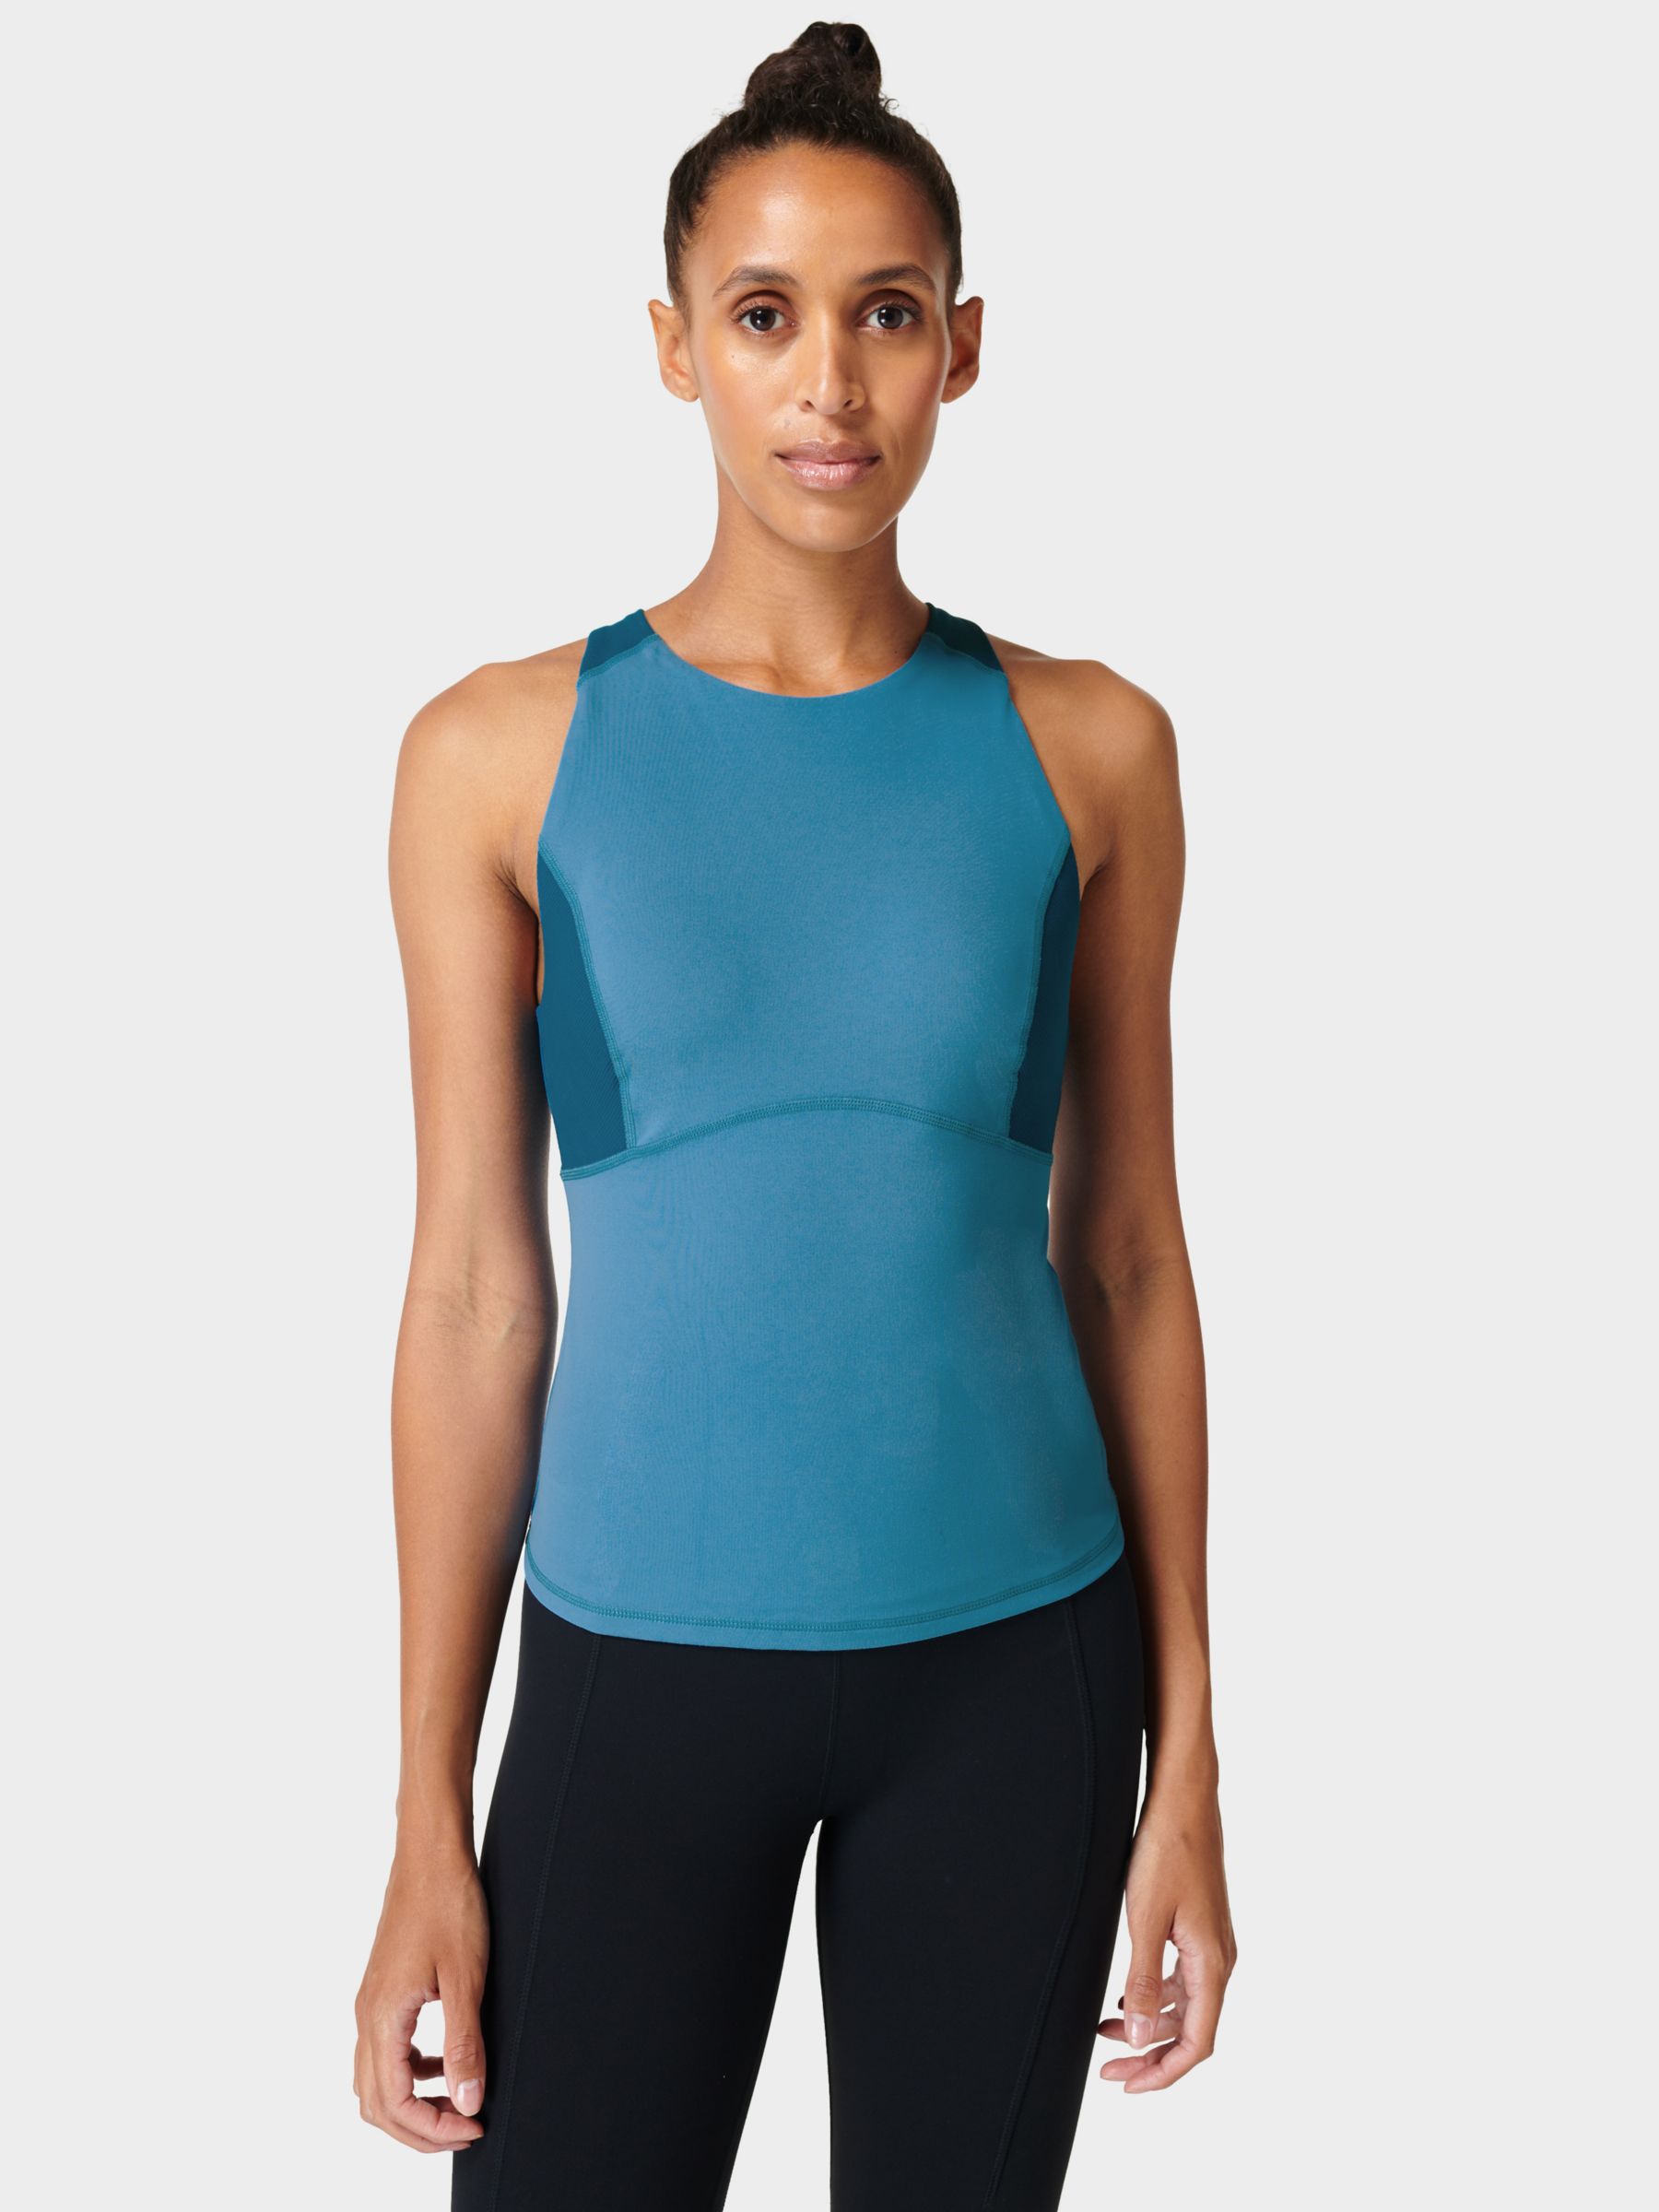 Workout tank top with a built in bra - The Last Stitch